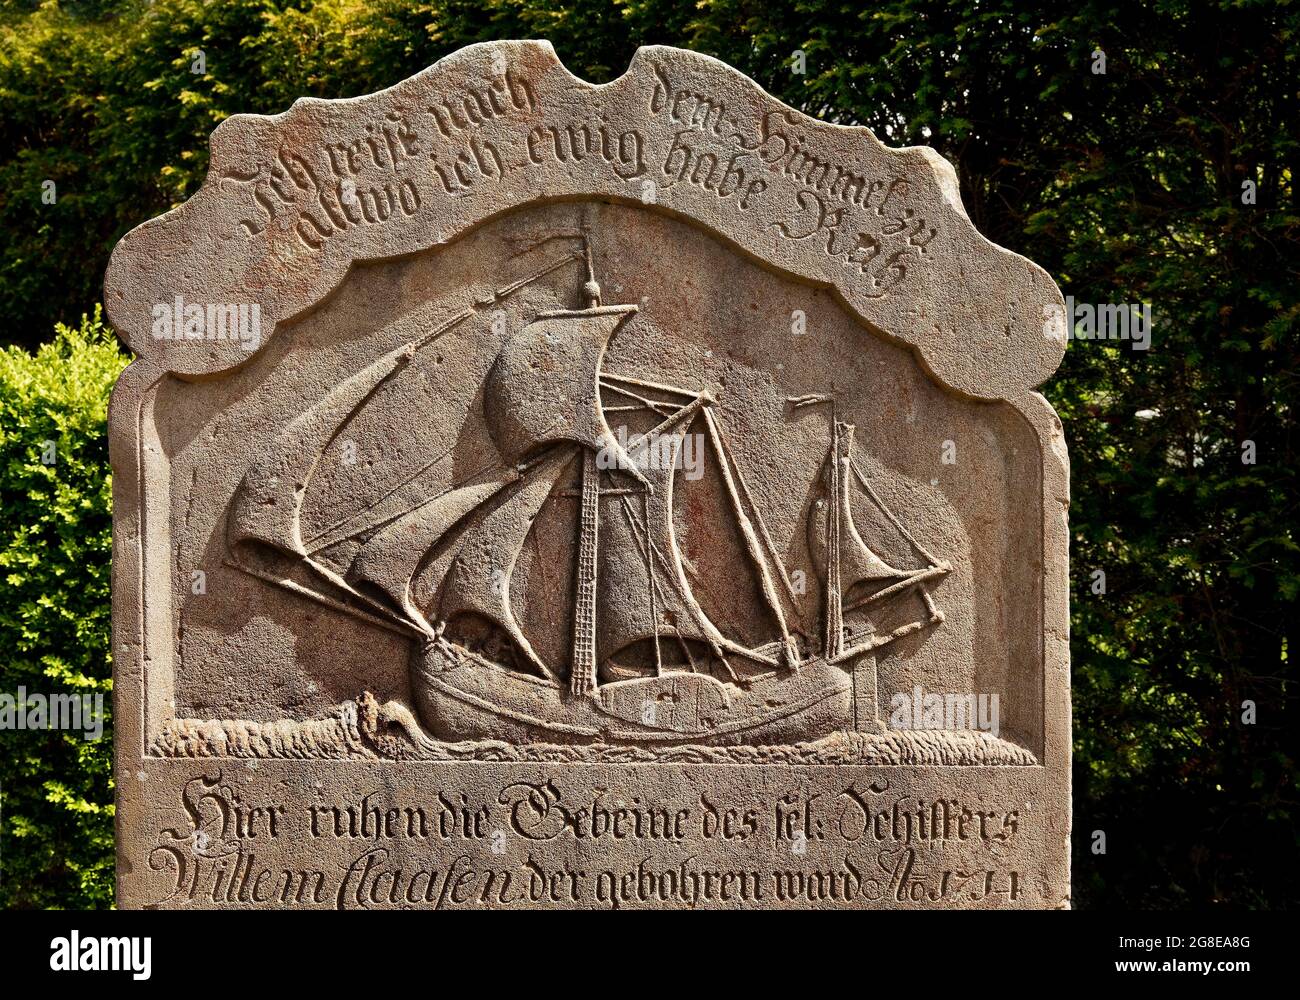 Grave of the seafarer Willem Claasen, speaking gravestones at the cemetery of St. Clemens church, Nebel, Amrum island, Germany Stock Photo